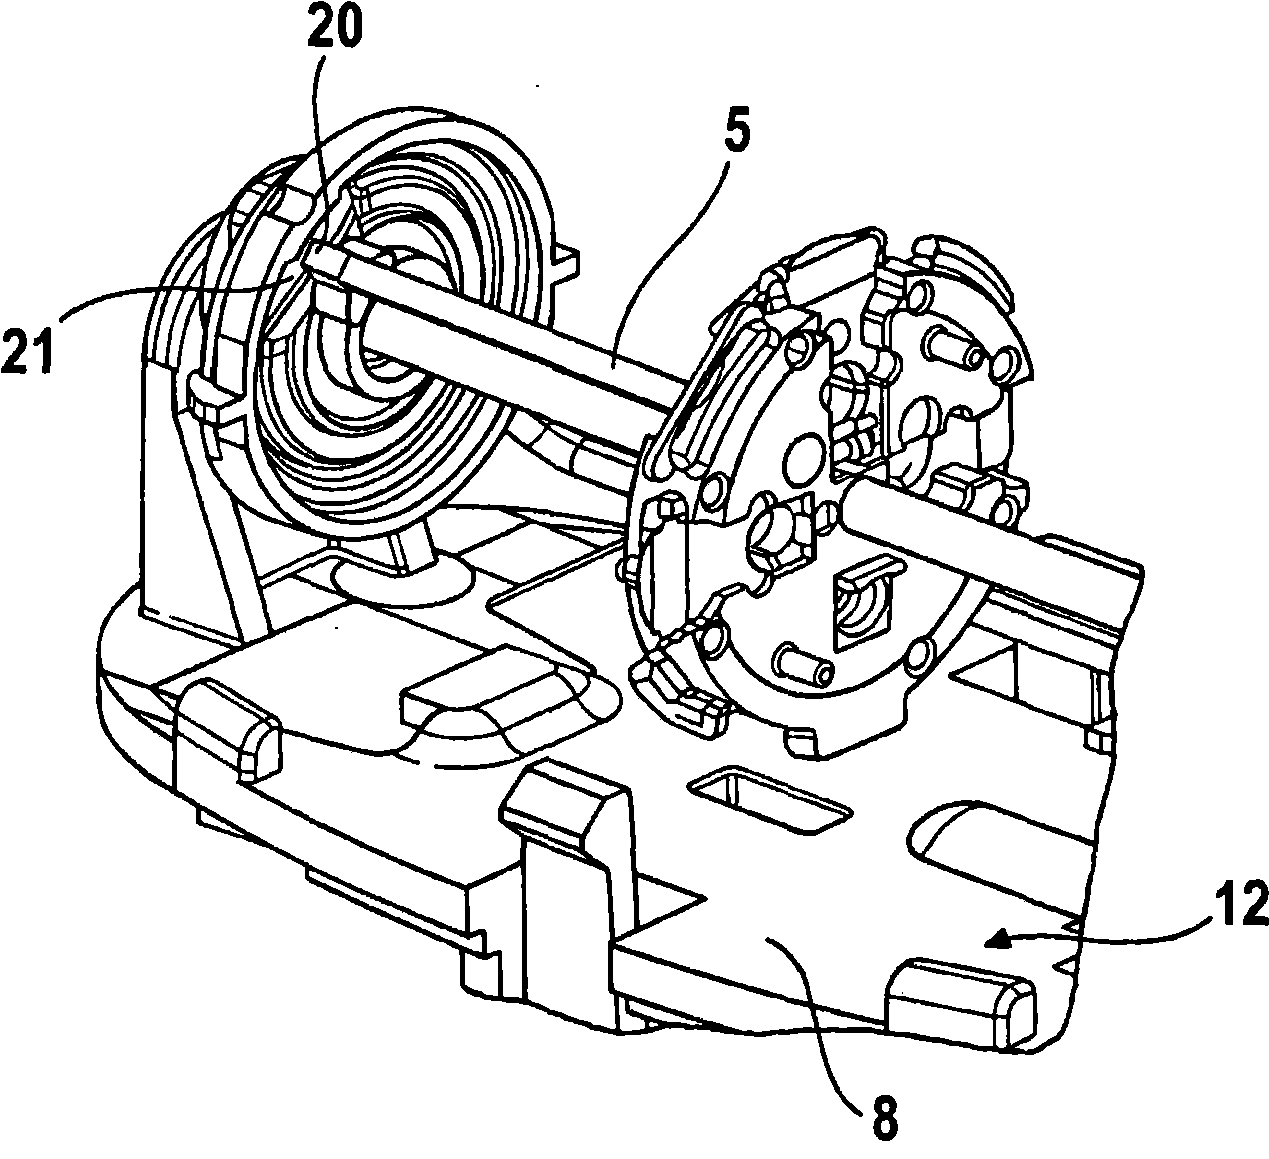 Washable personal grooming device, in particular hair removal device, and method for the production of components of such a device